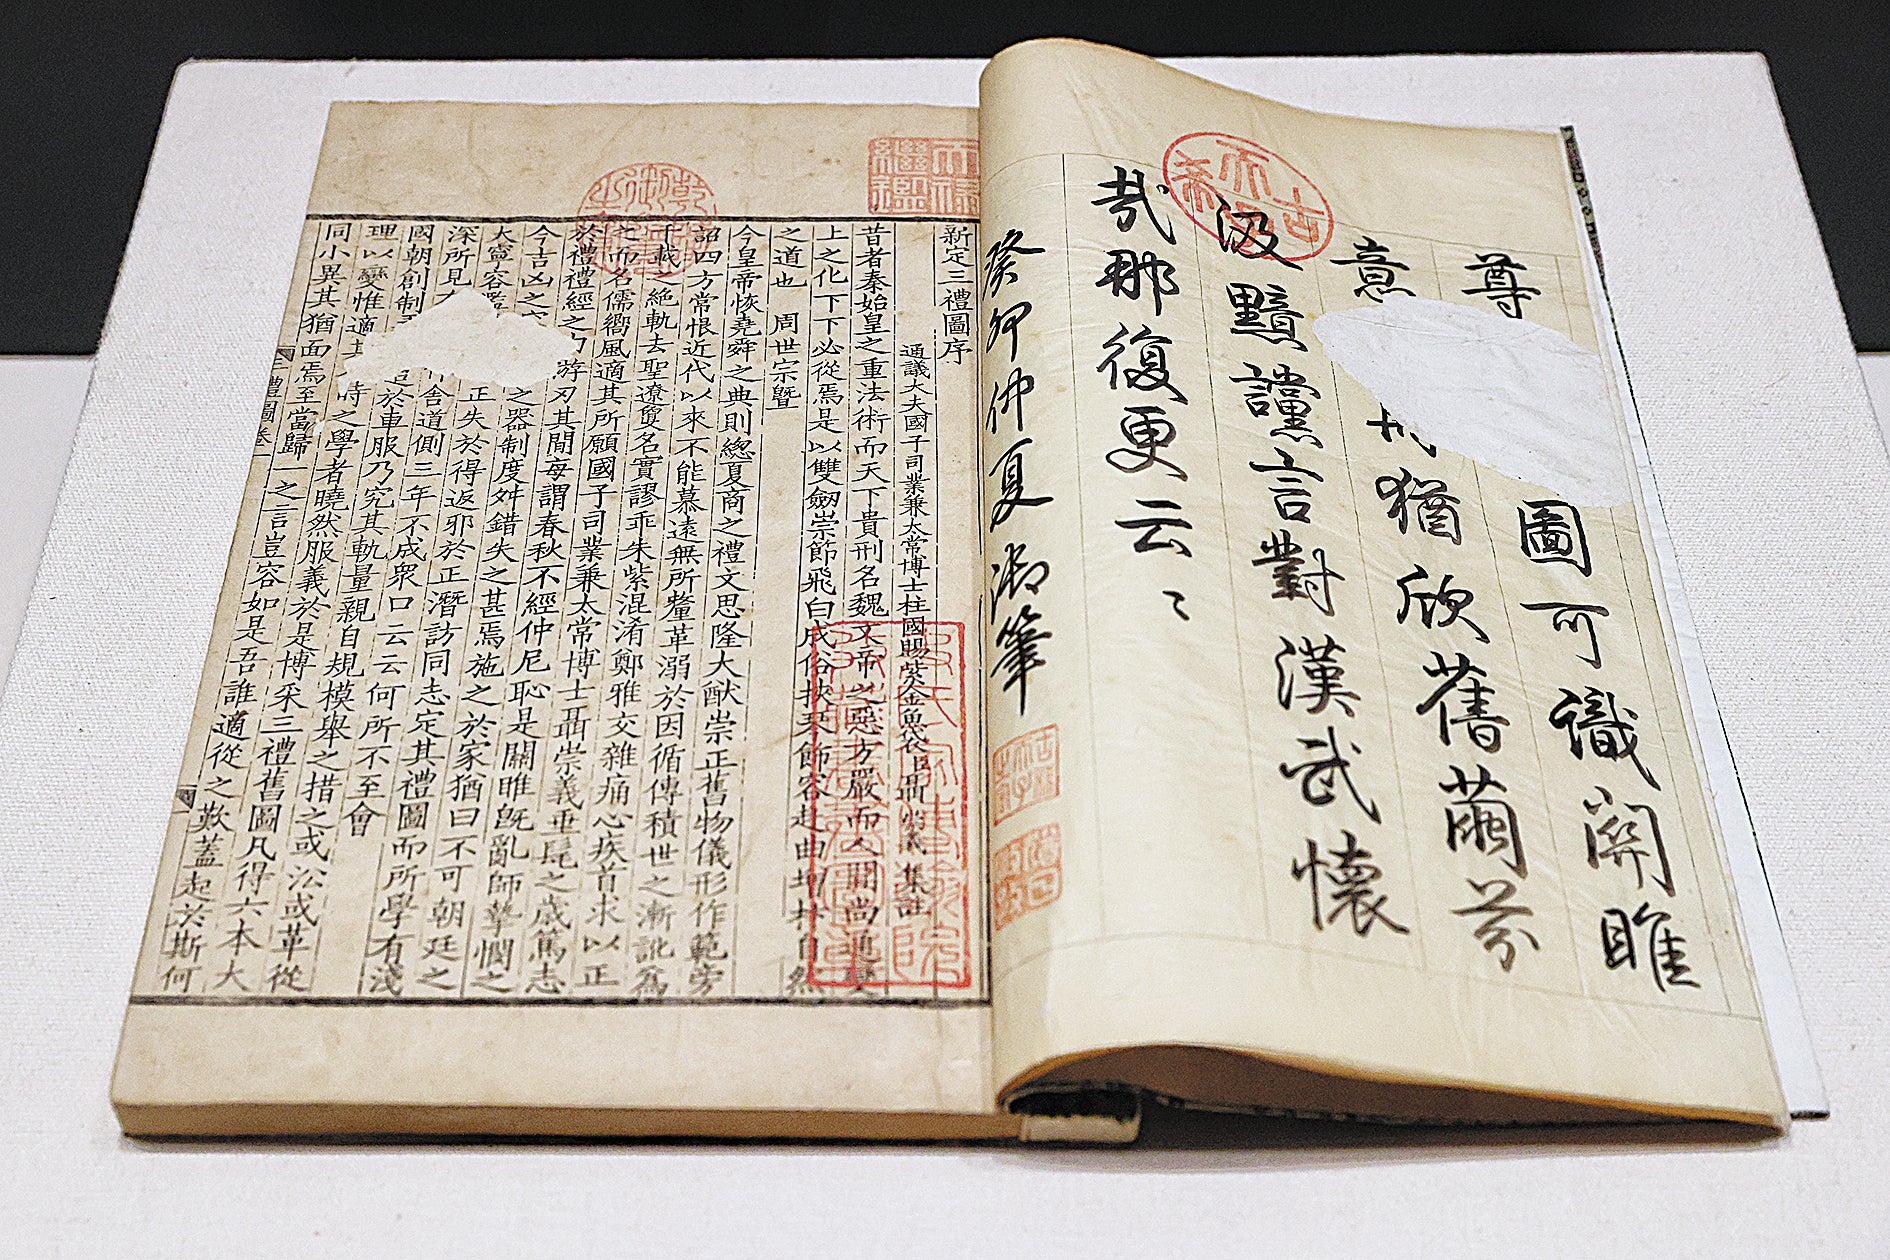 One copy of the collection exhibited at the National Library of China